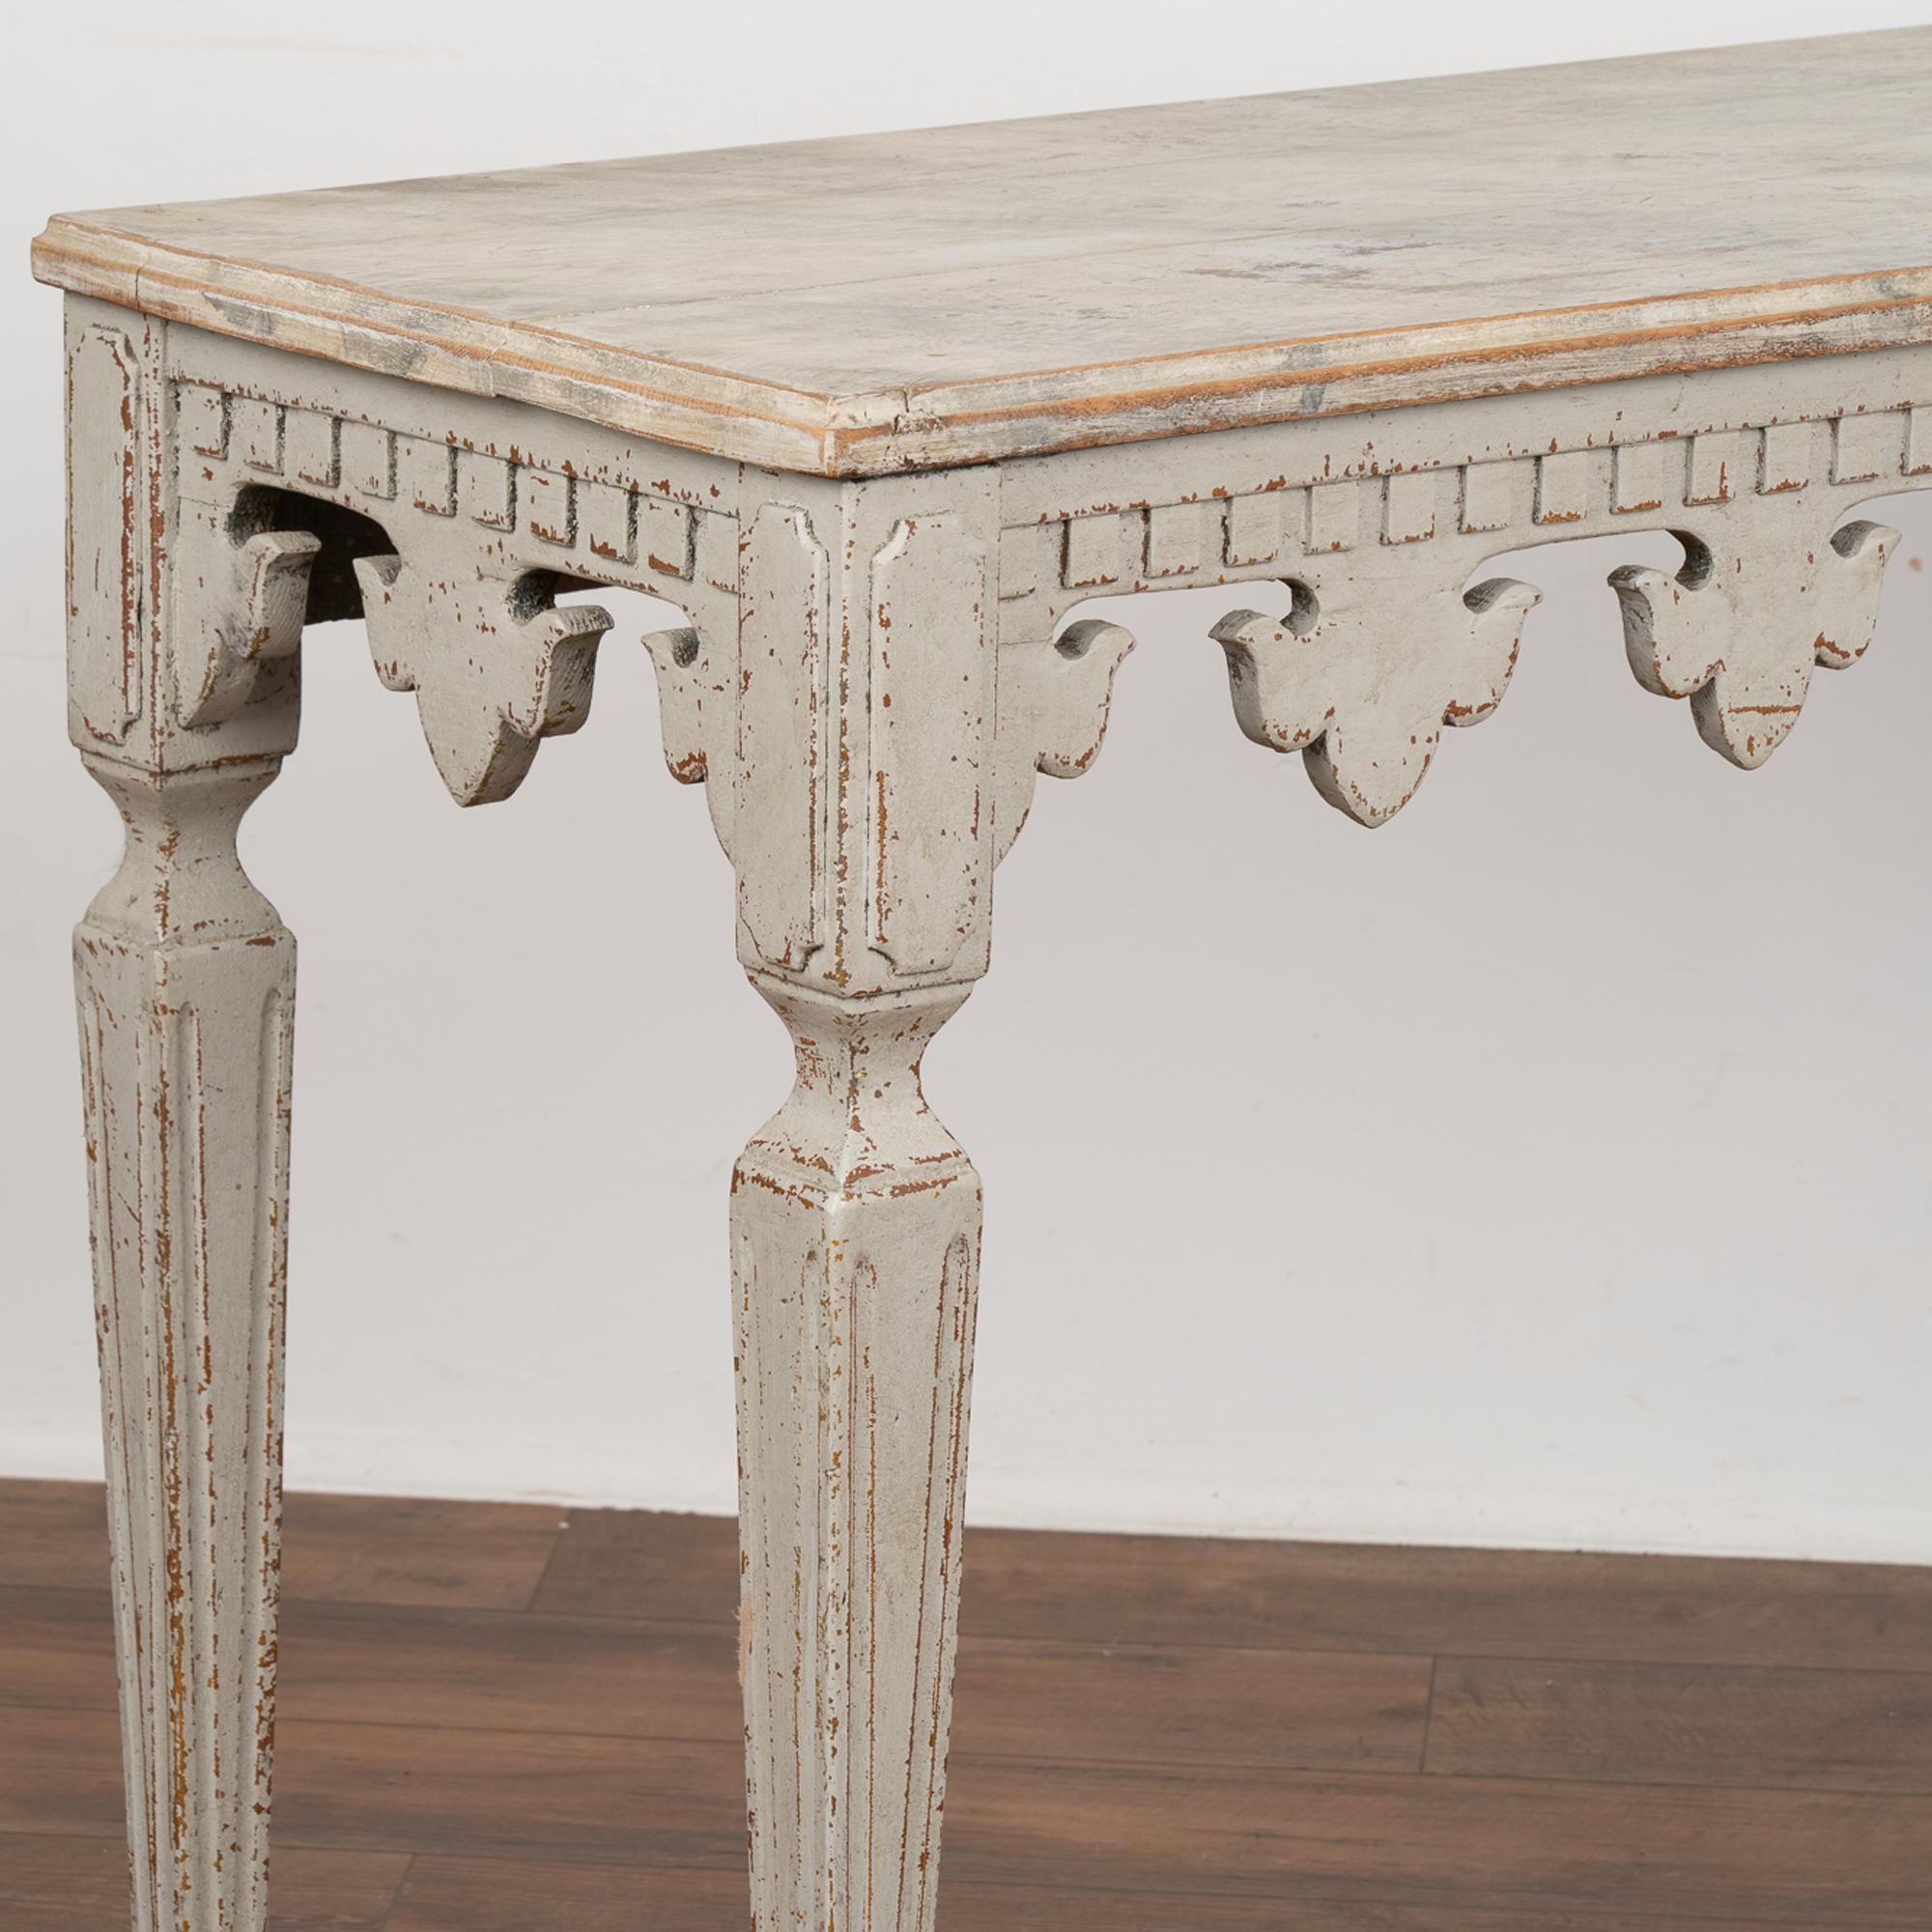 19th Century Gray Painted Console Table With Carved Fleur De Lis Skirt, Sweden circa 1880